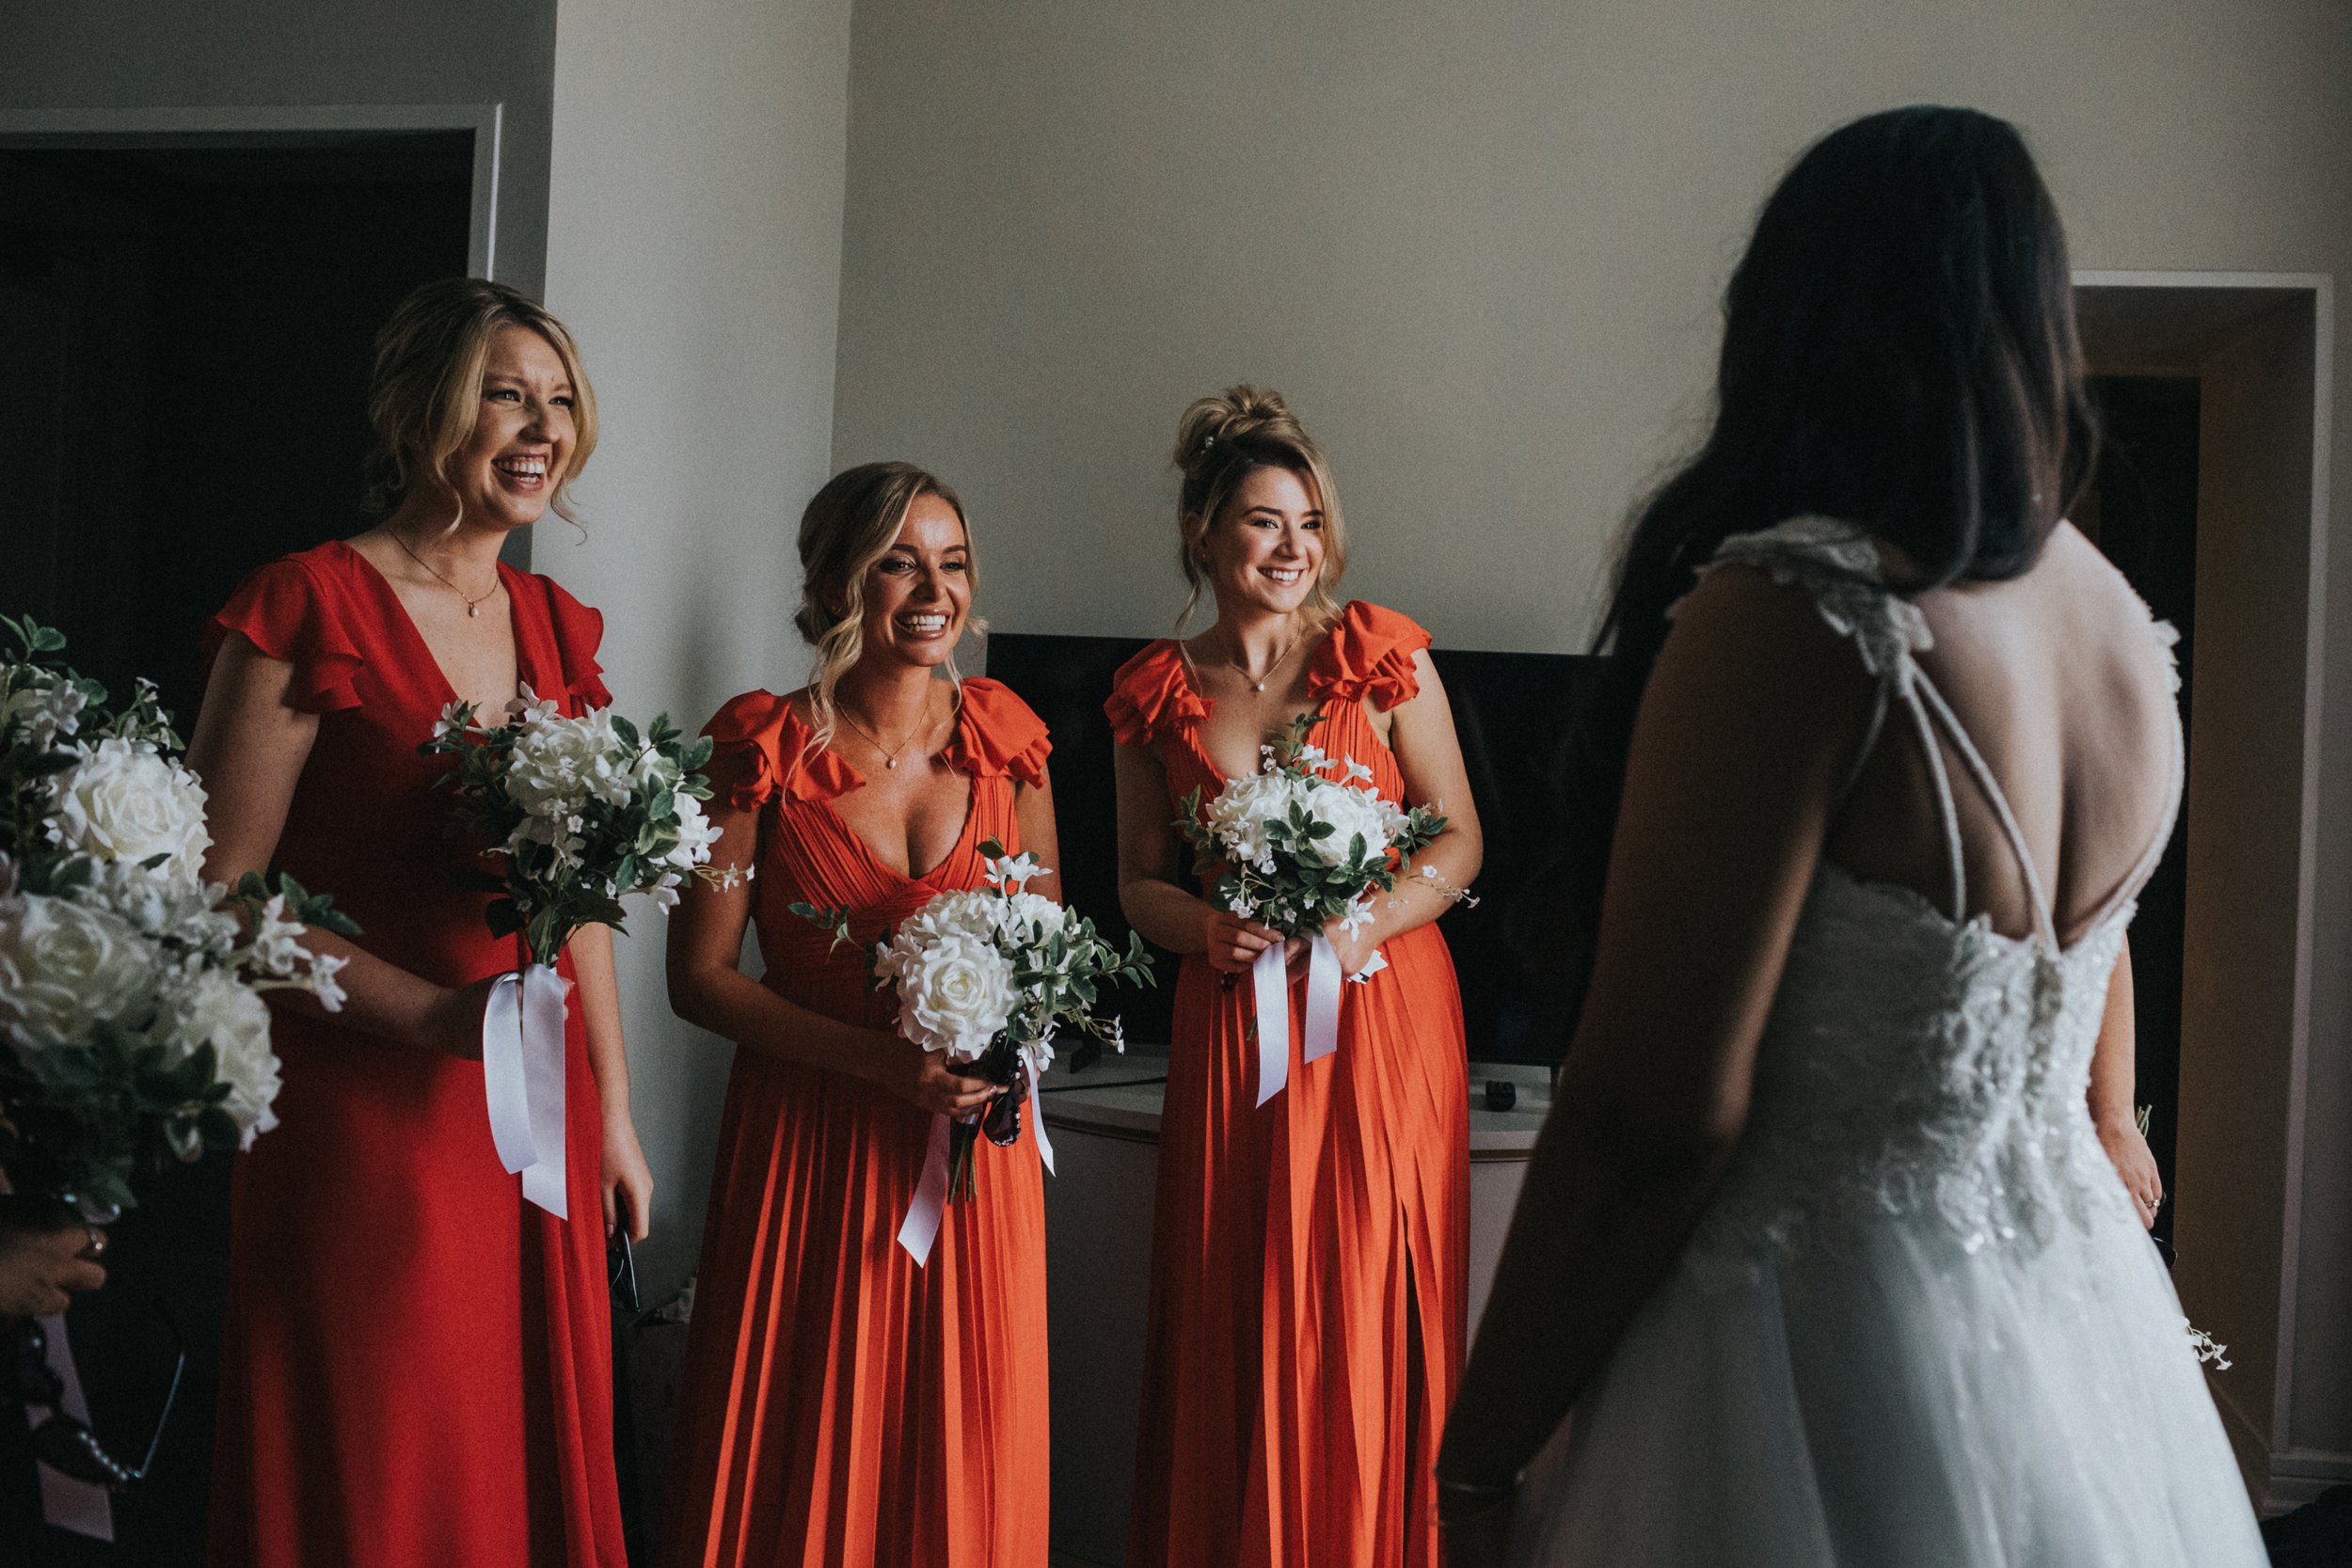 Bridesmaids arrive to see Bride in her wedding dress. 